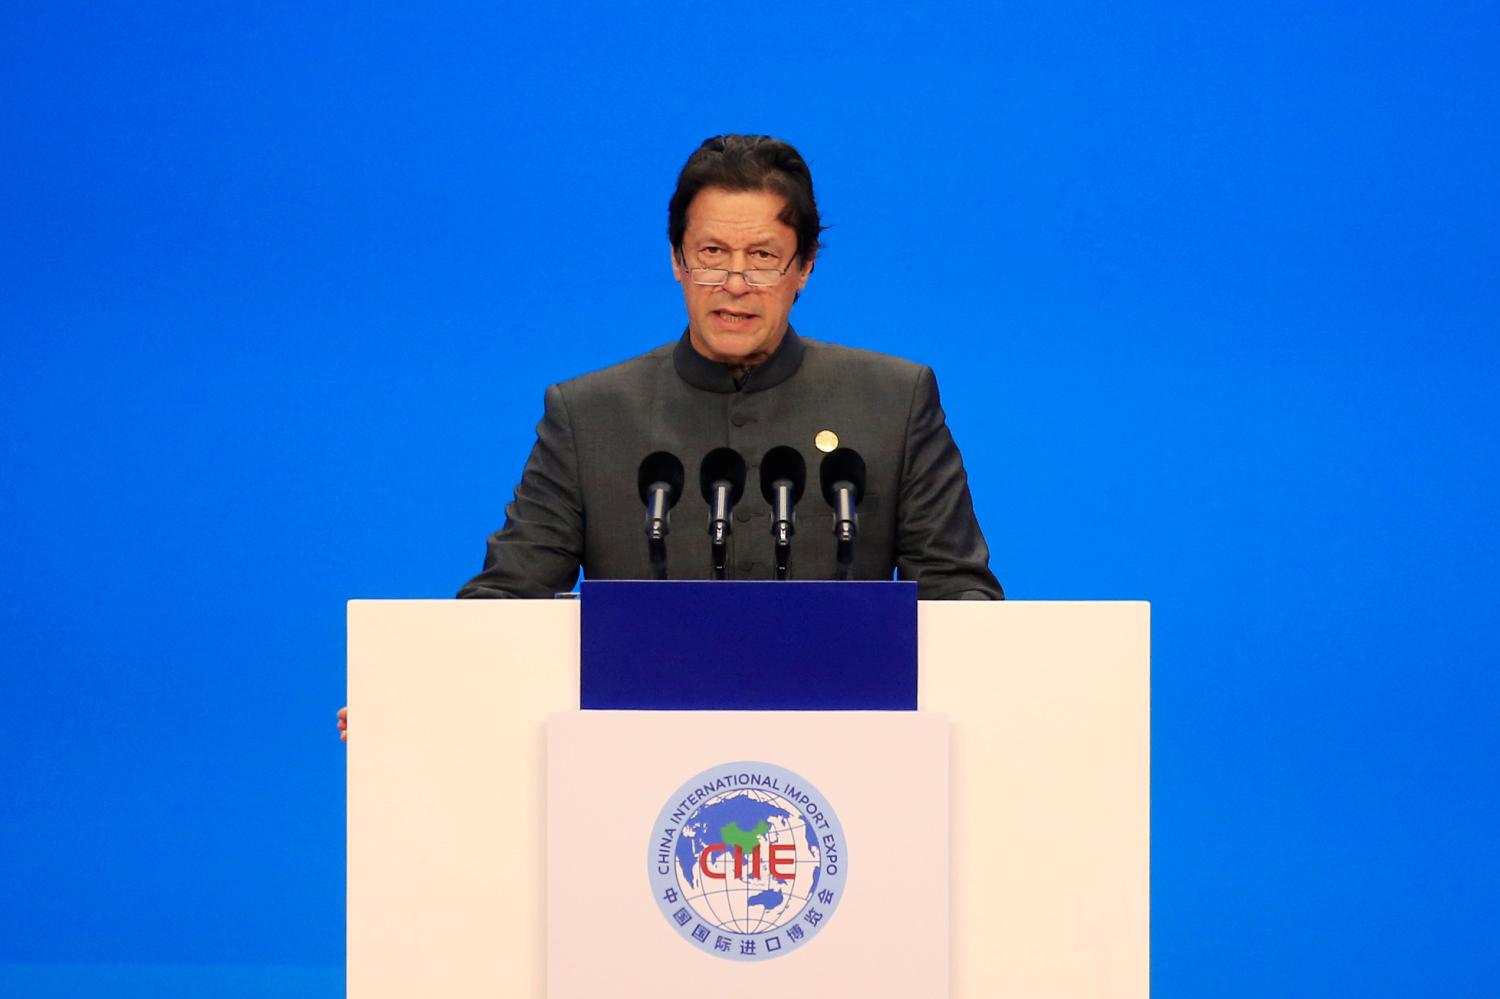 Pakistani Prime Minister Imran Khan speaks at the opening ceremony for the first China International Import Expo (CIIE) in Shanghai, China November 5, 2018.  REUTERS/Aly Song/Pool - RC128E965F40